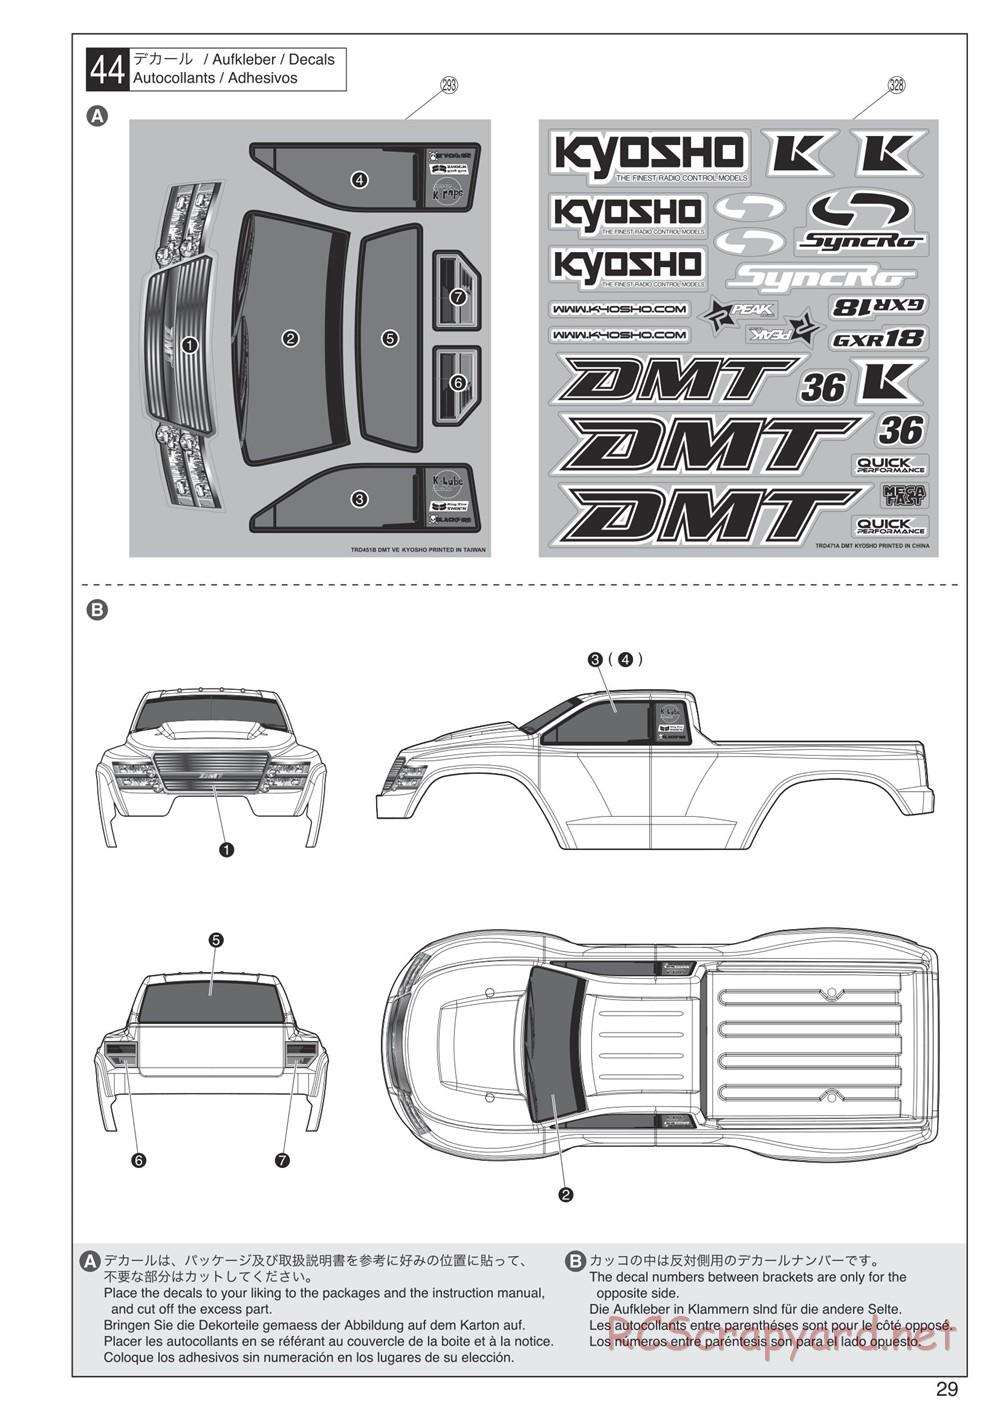 Kyosho - DMT - Manual - Page 29